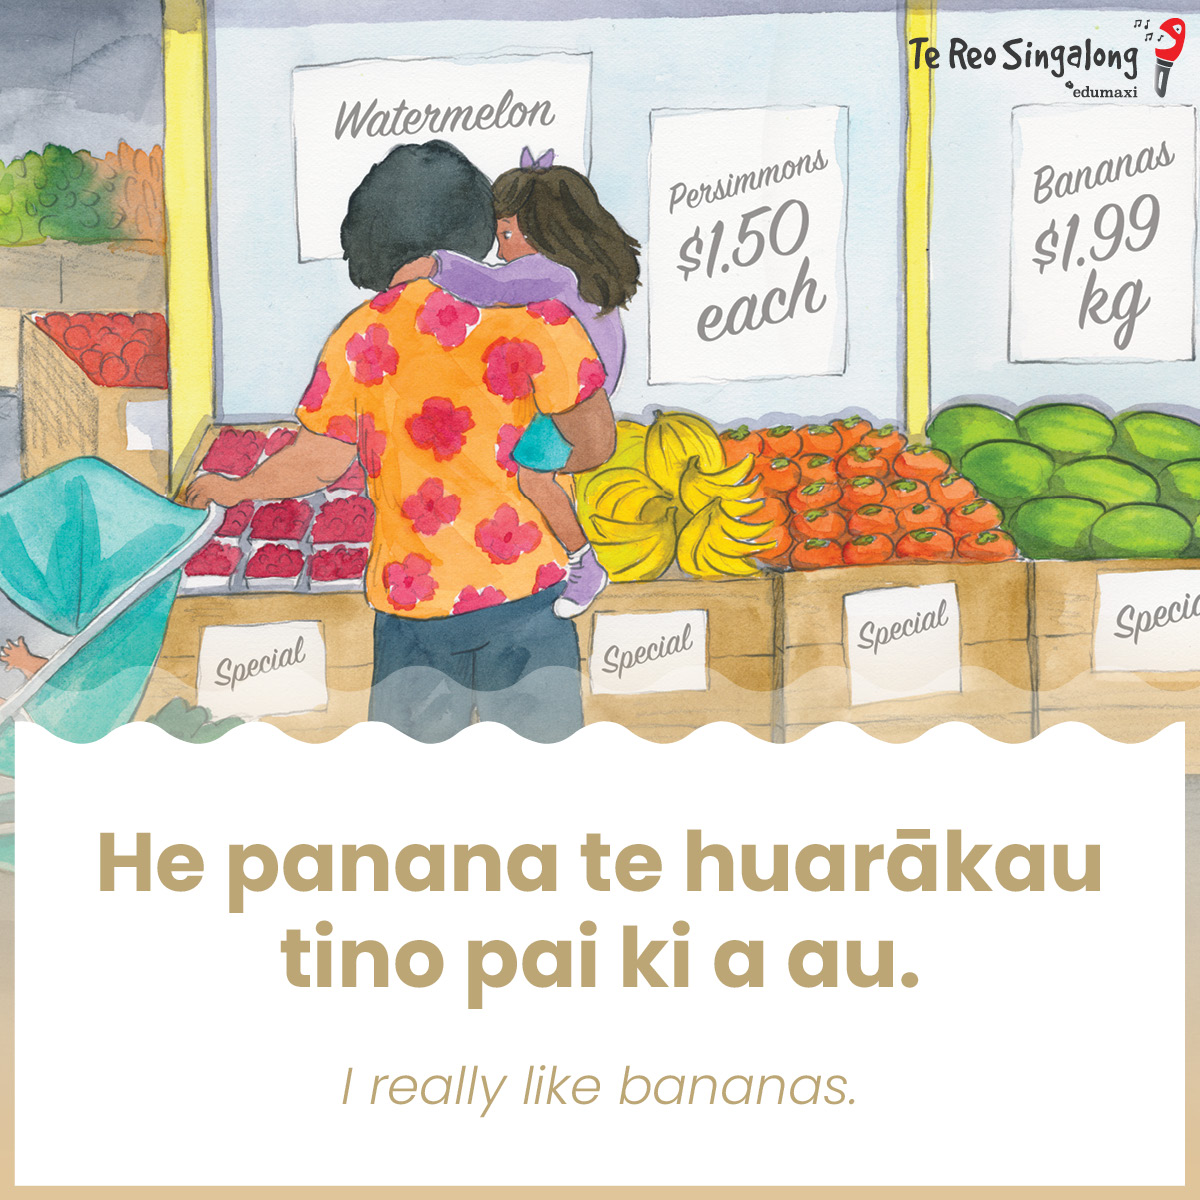 Ever thought of practising te reo when you are doing your food shopping? Our book about fruit is a good way to start. You can find it at tereosingalong.co.nz/product/he-hua…
#tereosingalong #fruit #tereomaori #maorilanguage #teachmaori #learntereo